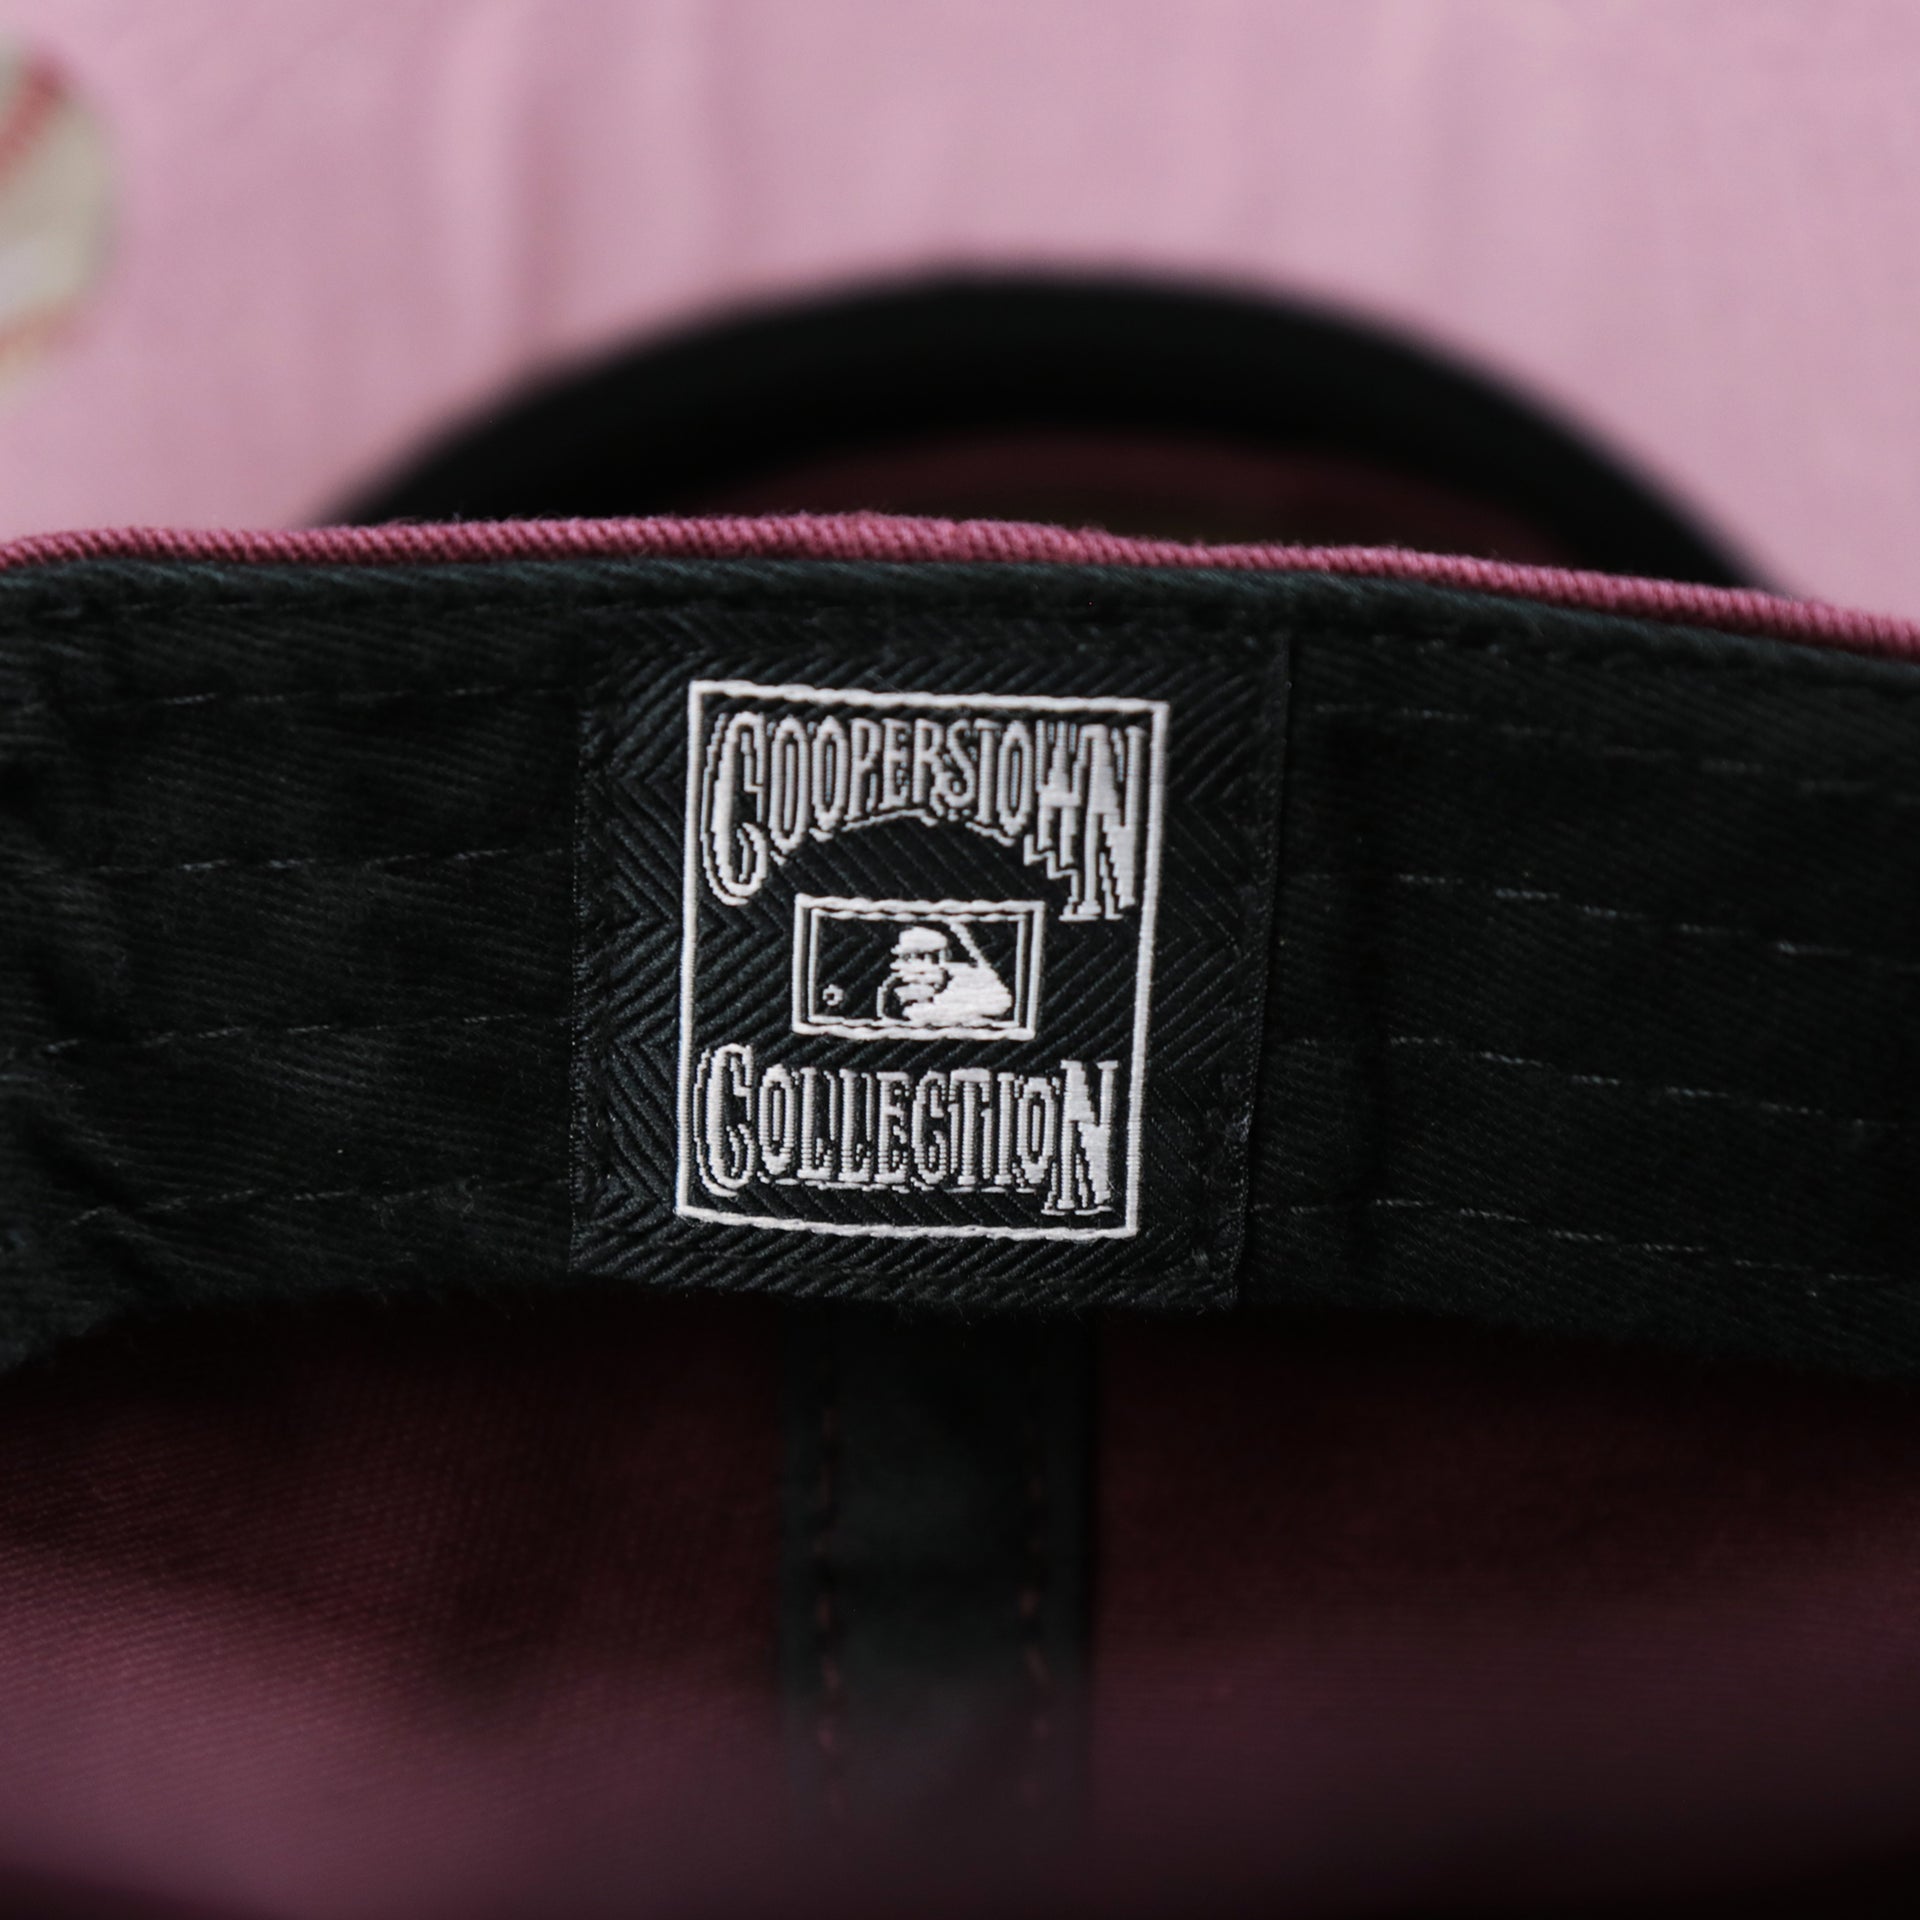 The Cooperstown Collection Tag on the Cooperstown Philadelphia Phillies Vintage 1910s Phillies Logo Dad Hat | Dark Maroon Dad Hat